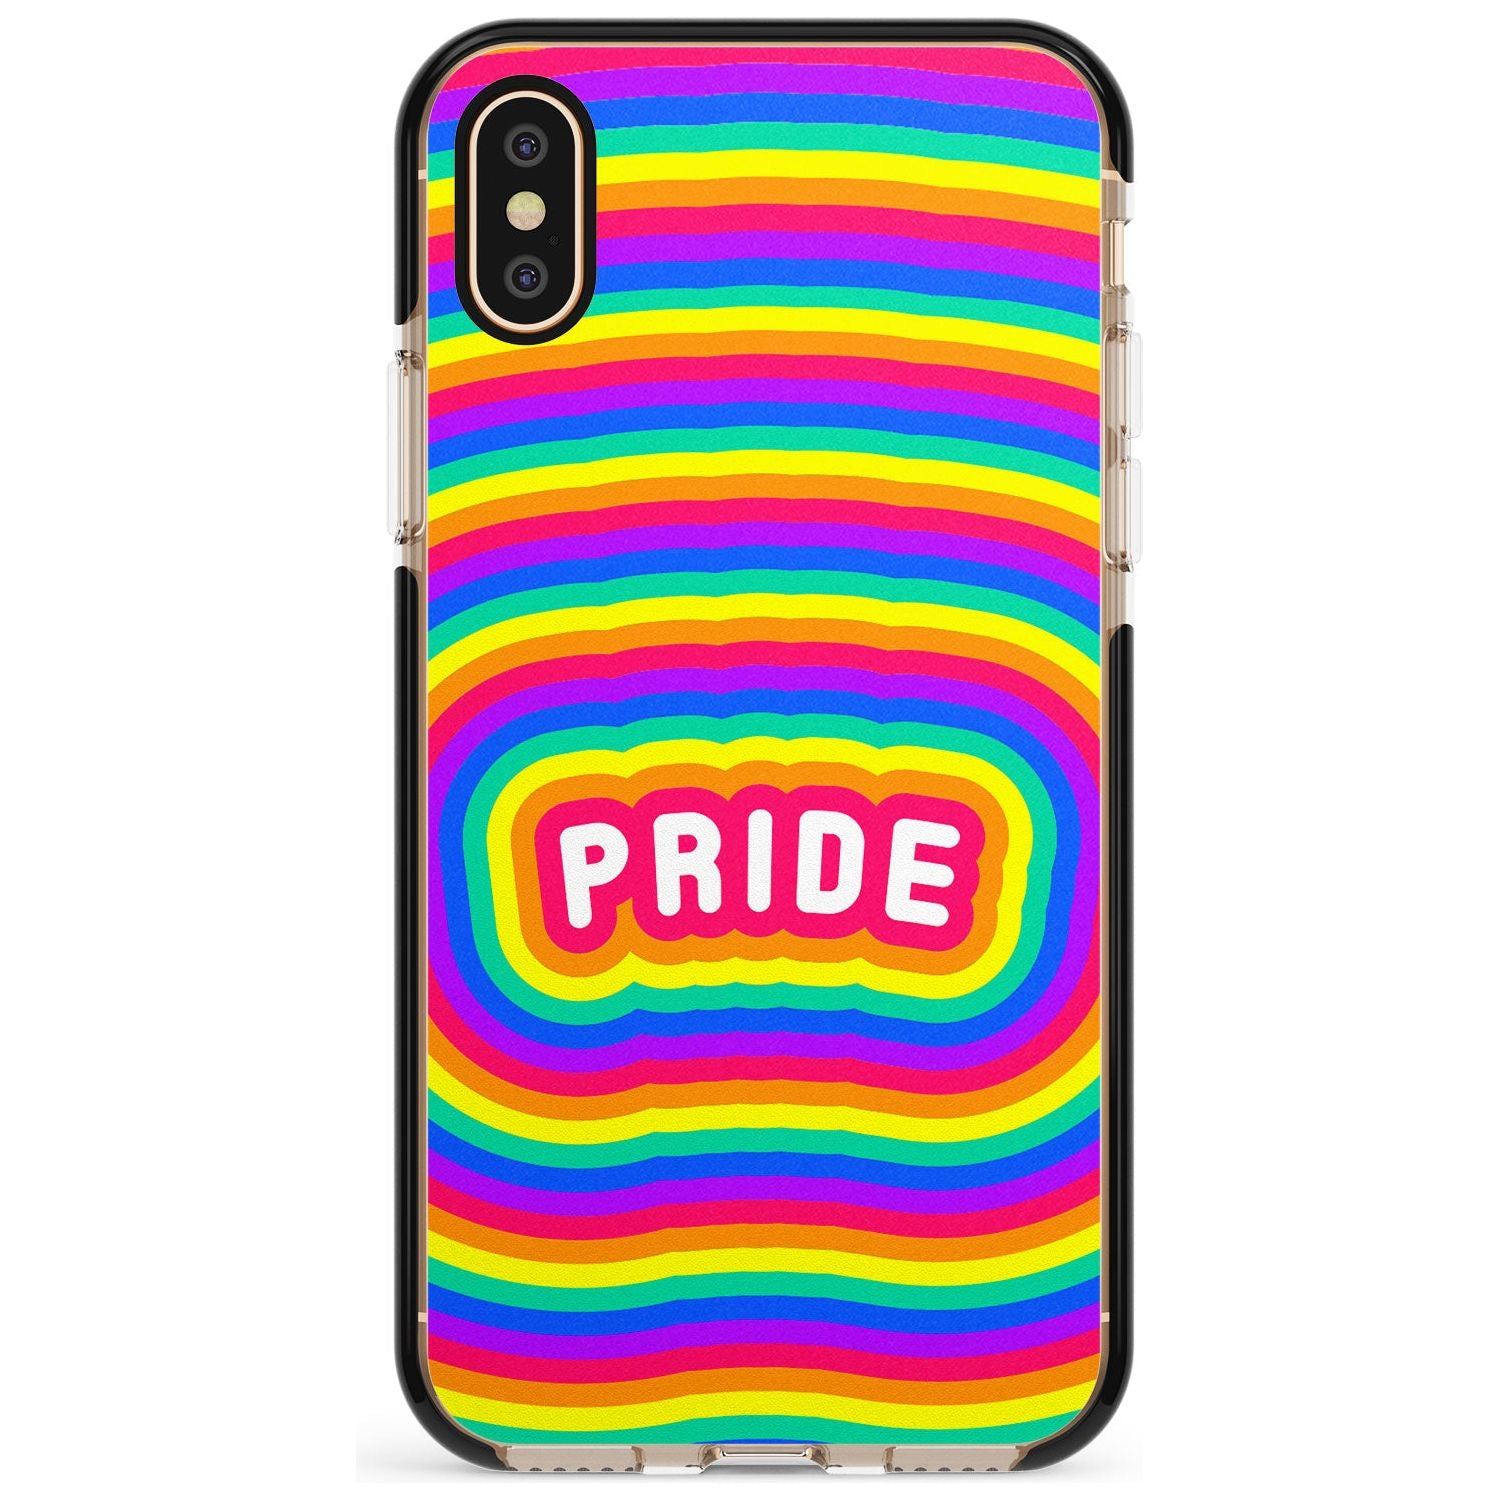 Pride Black Impact Phone Case for iPhone X XS Max XR